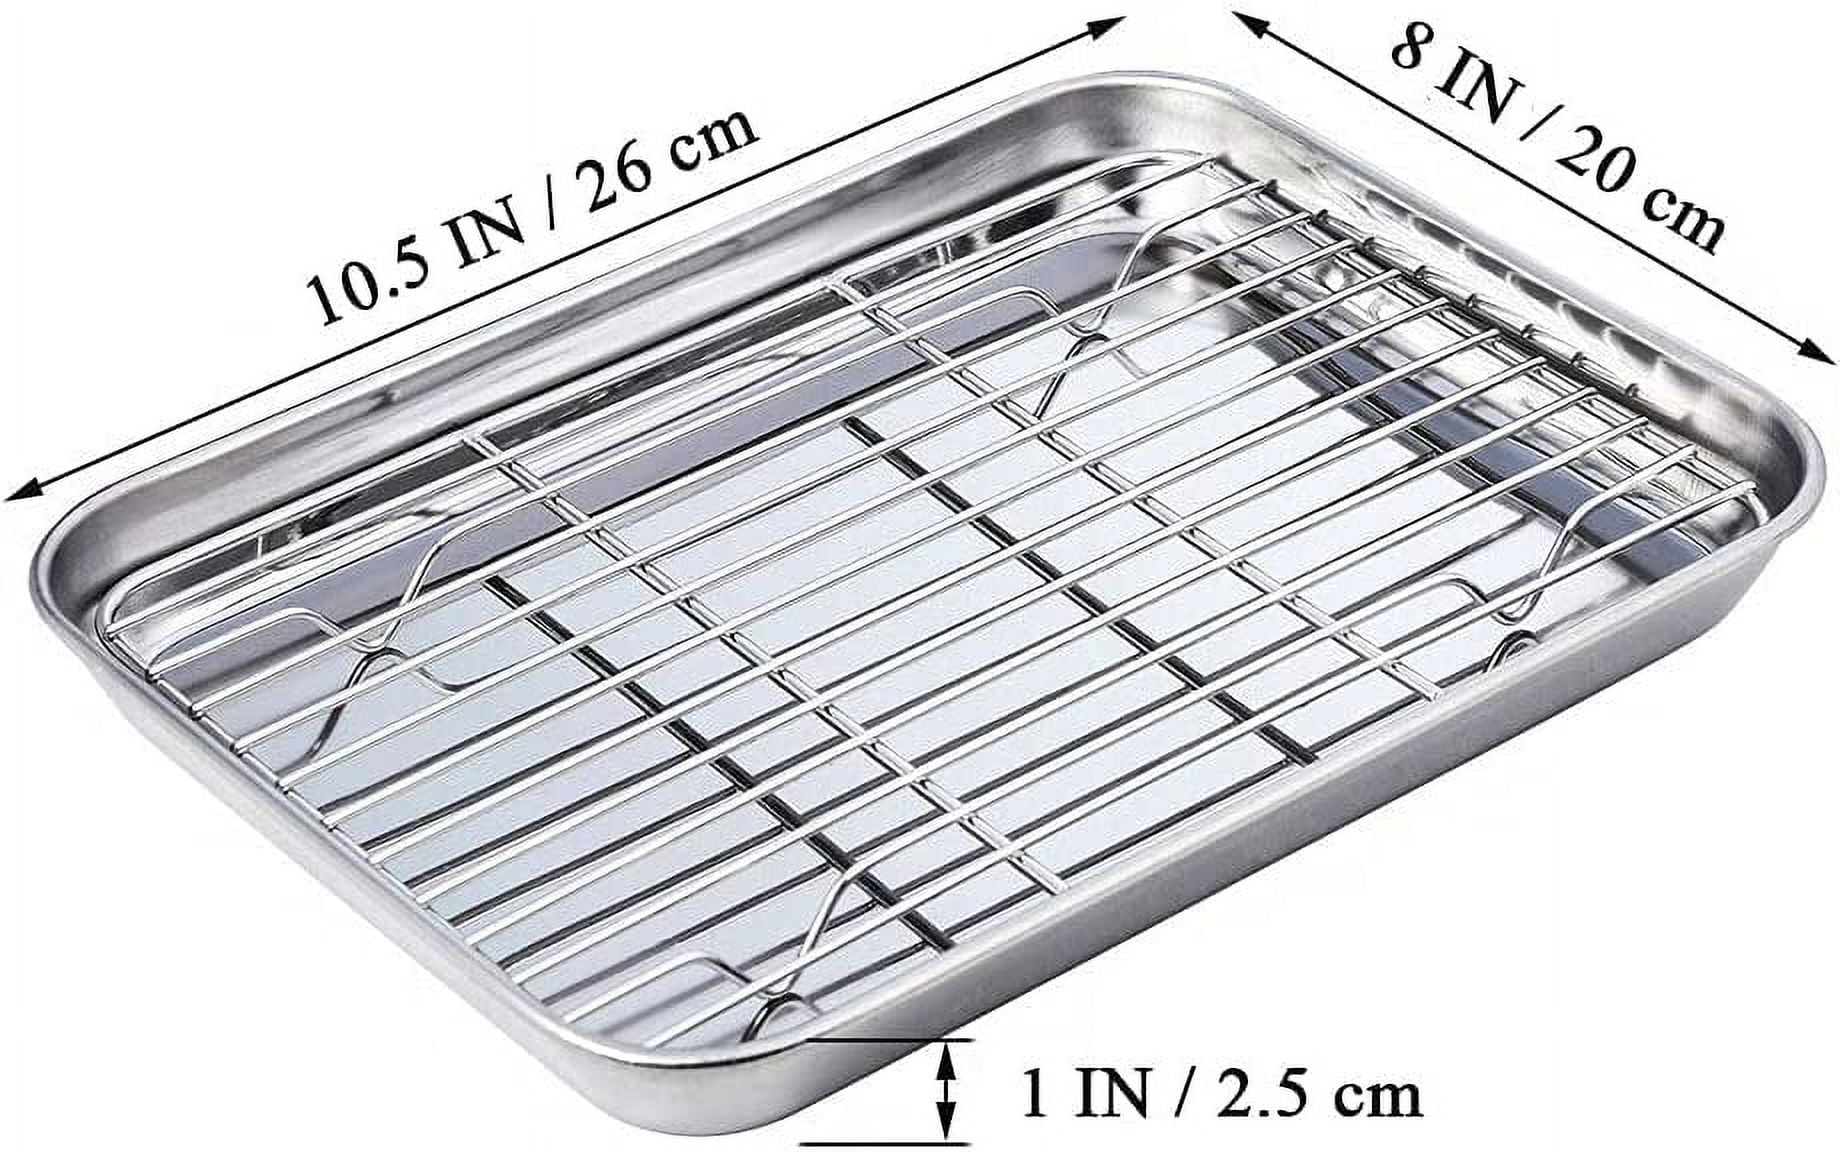 Stainless Steel Baking Sheet with Rack Set, E-far 12.4”x9.7” Cookie Sheet  Broiling Pan for Oven, Rimmed Metal Tray with Wire Rack for